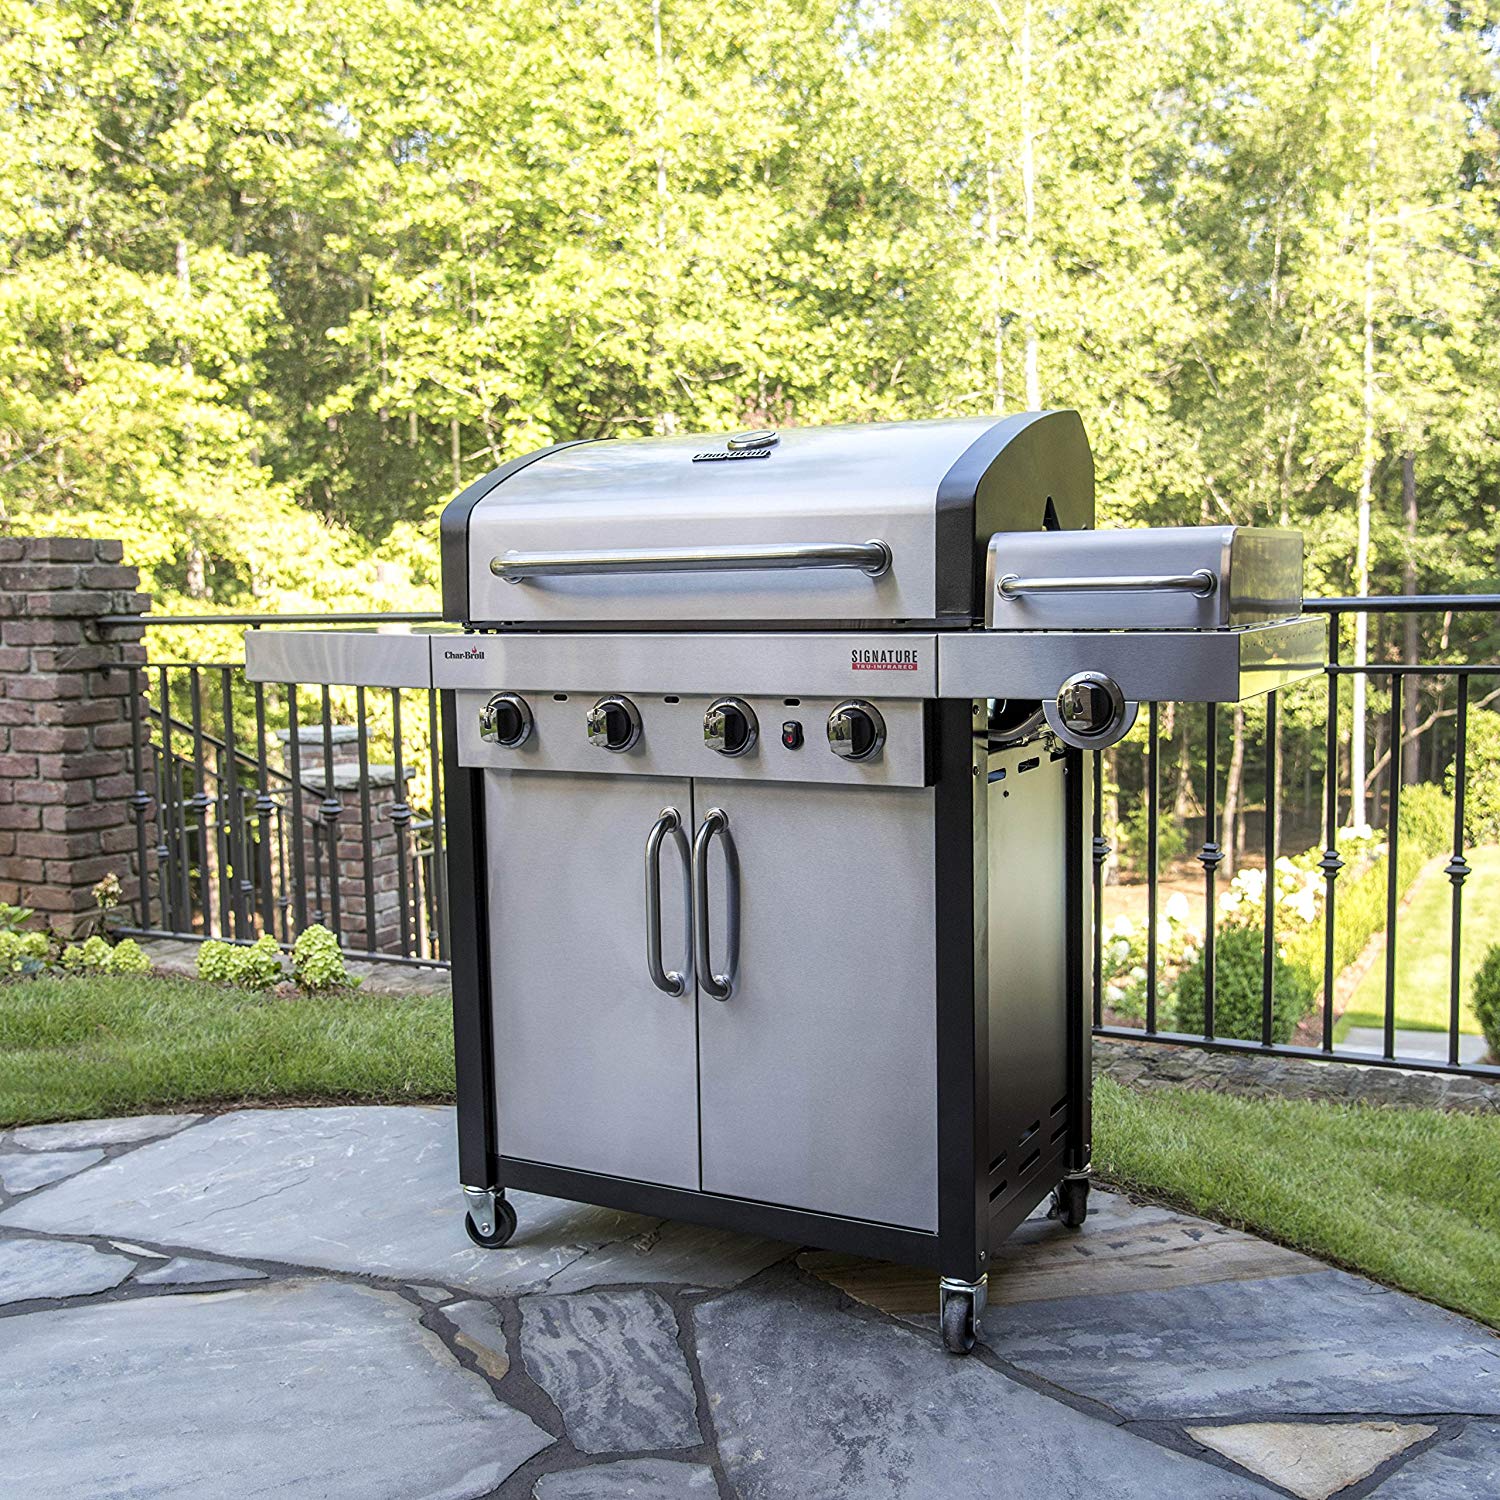 BBQ Gas Grill Deals - Buy Electric, Charcoal and Propane Grills At Best Prices